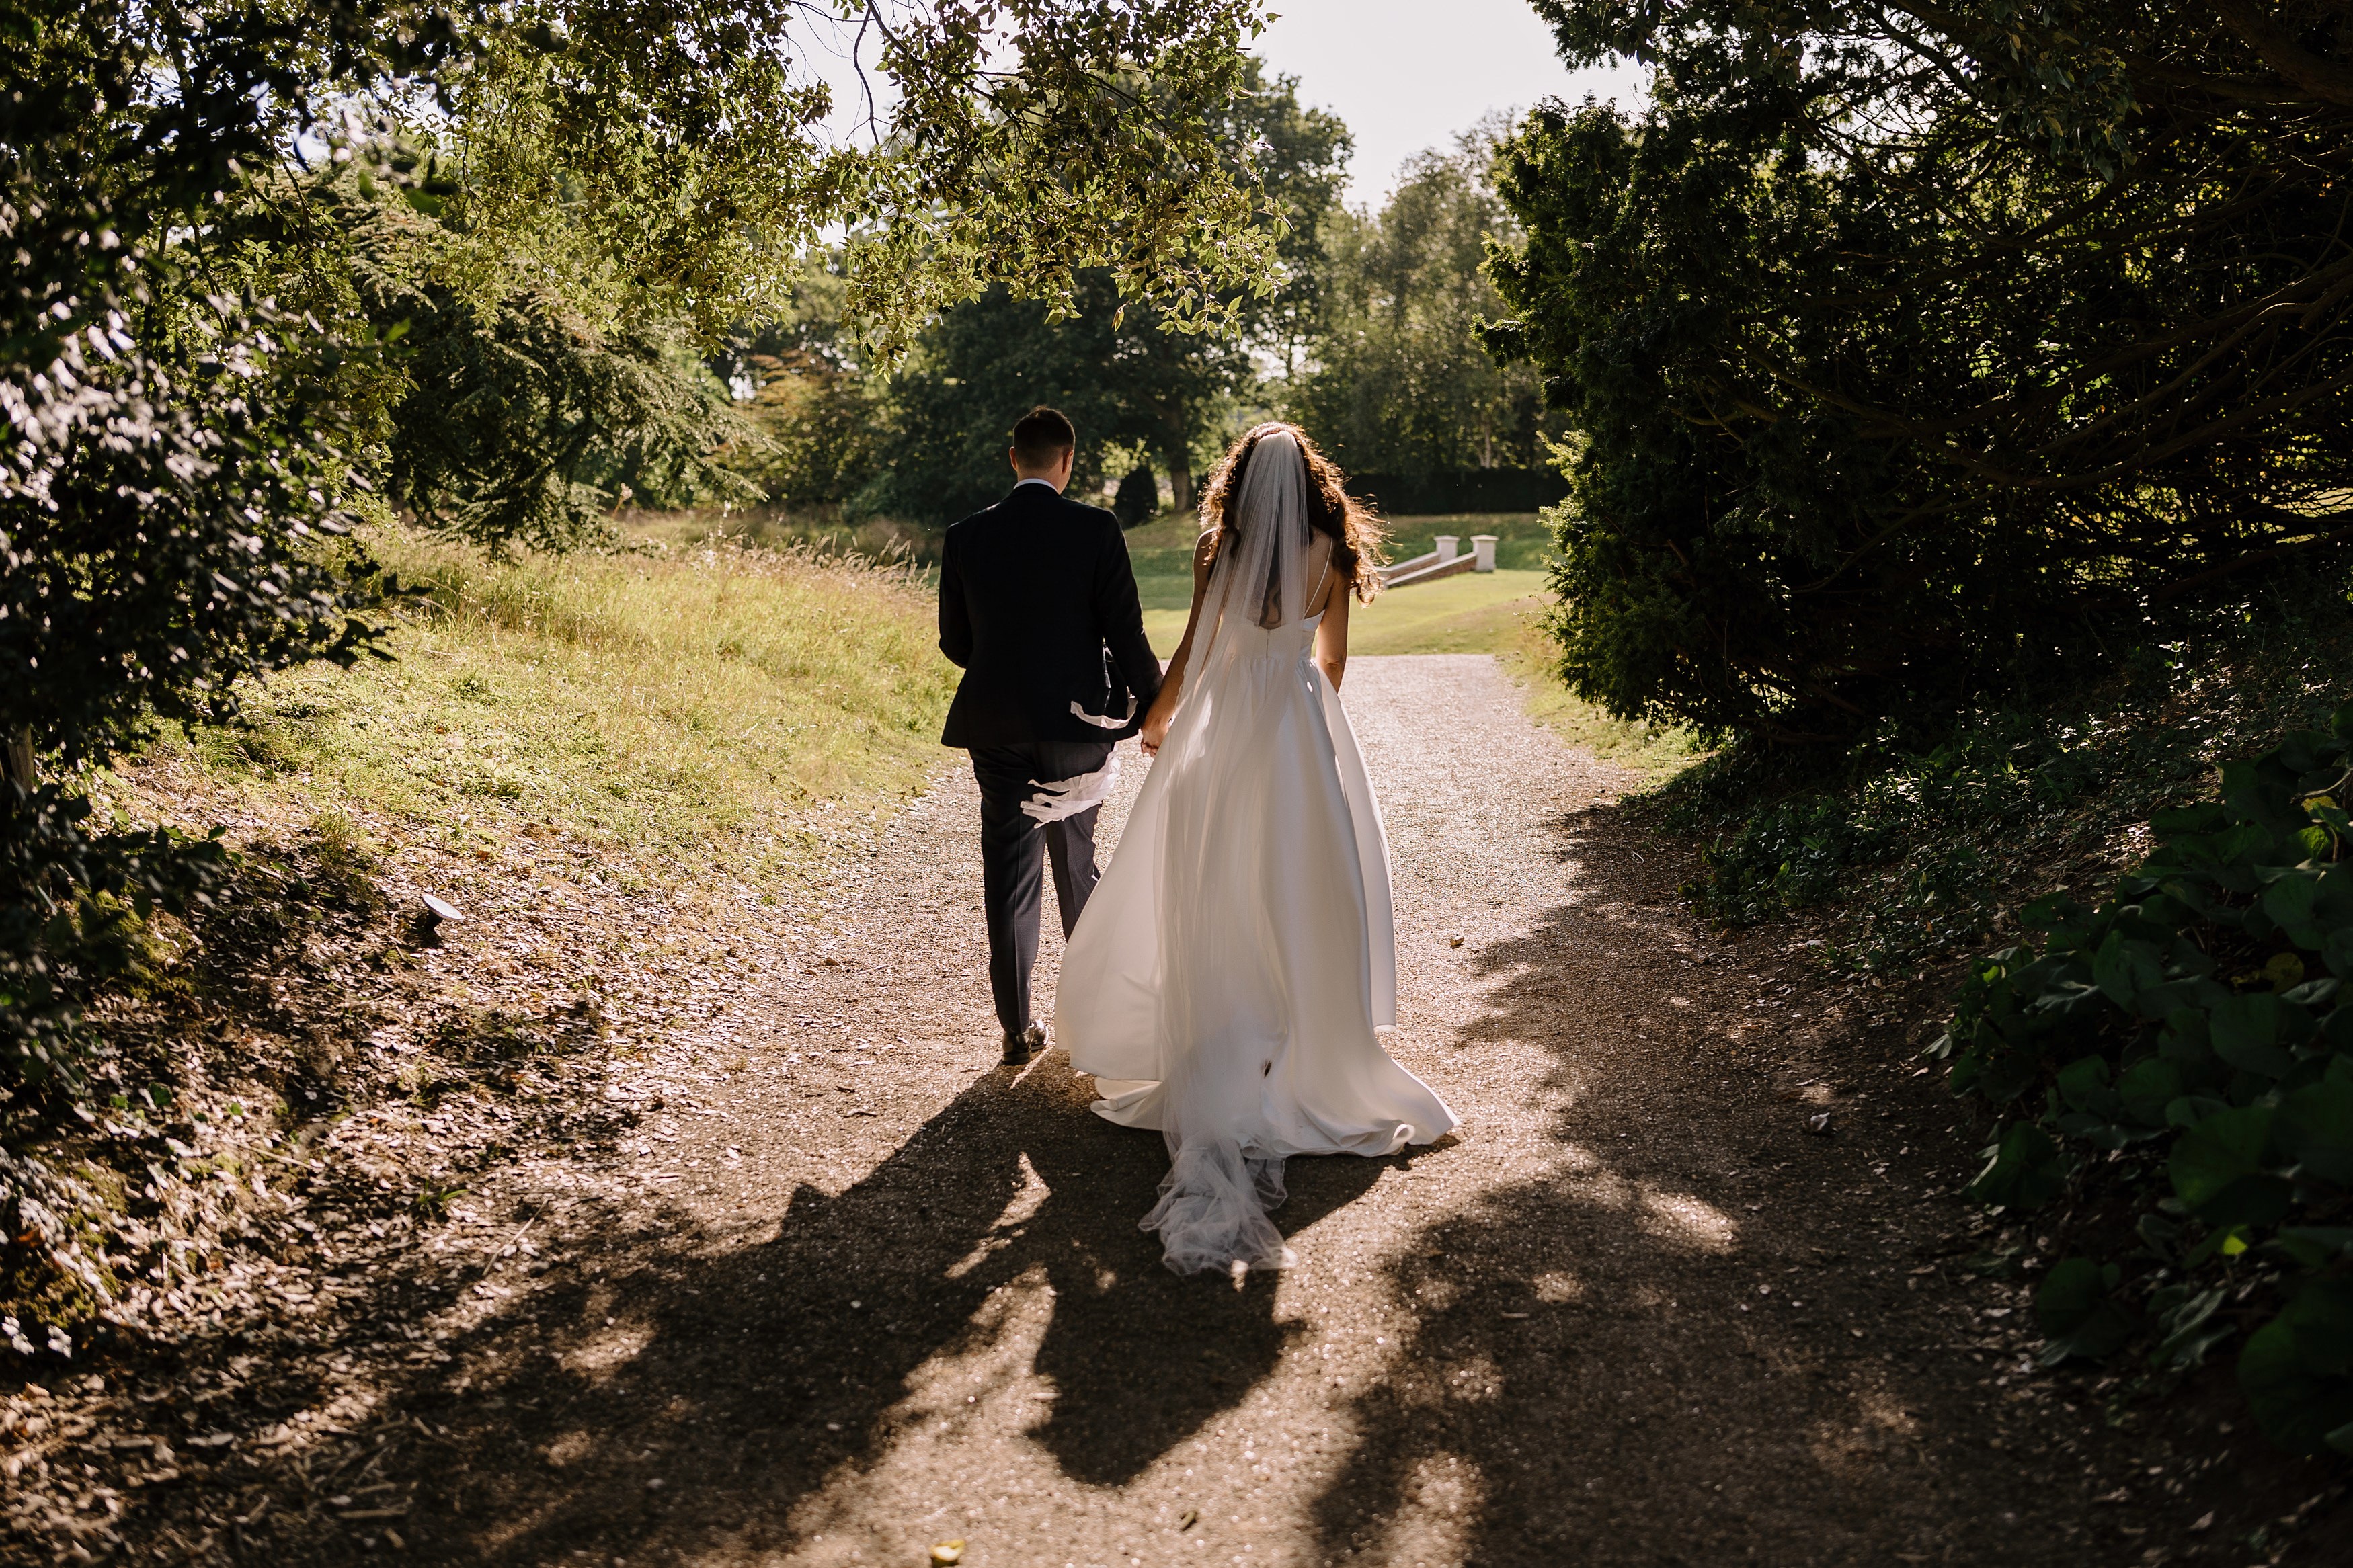 A photo from behind showing a bride and groom walk through Goodnestone Park hand in hand